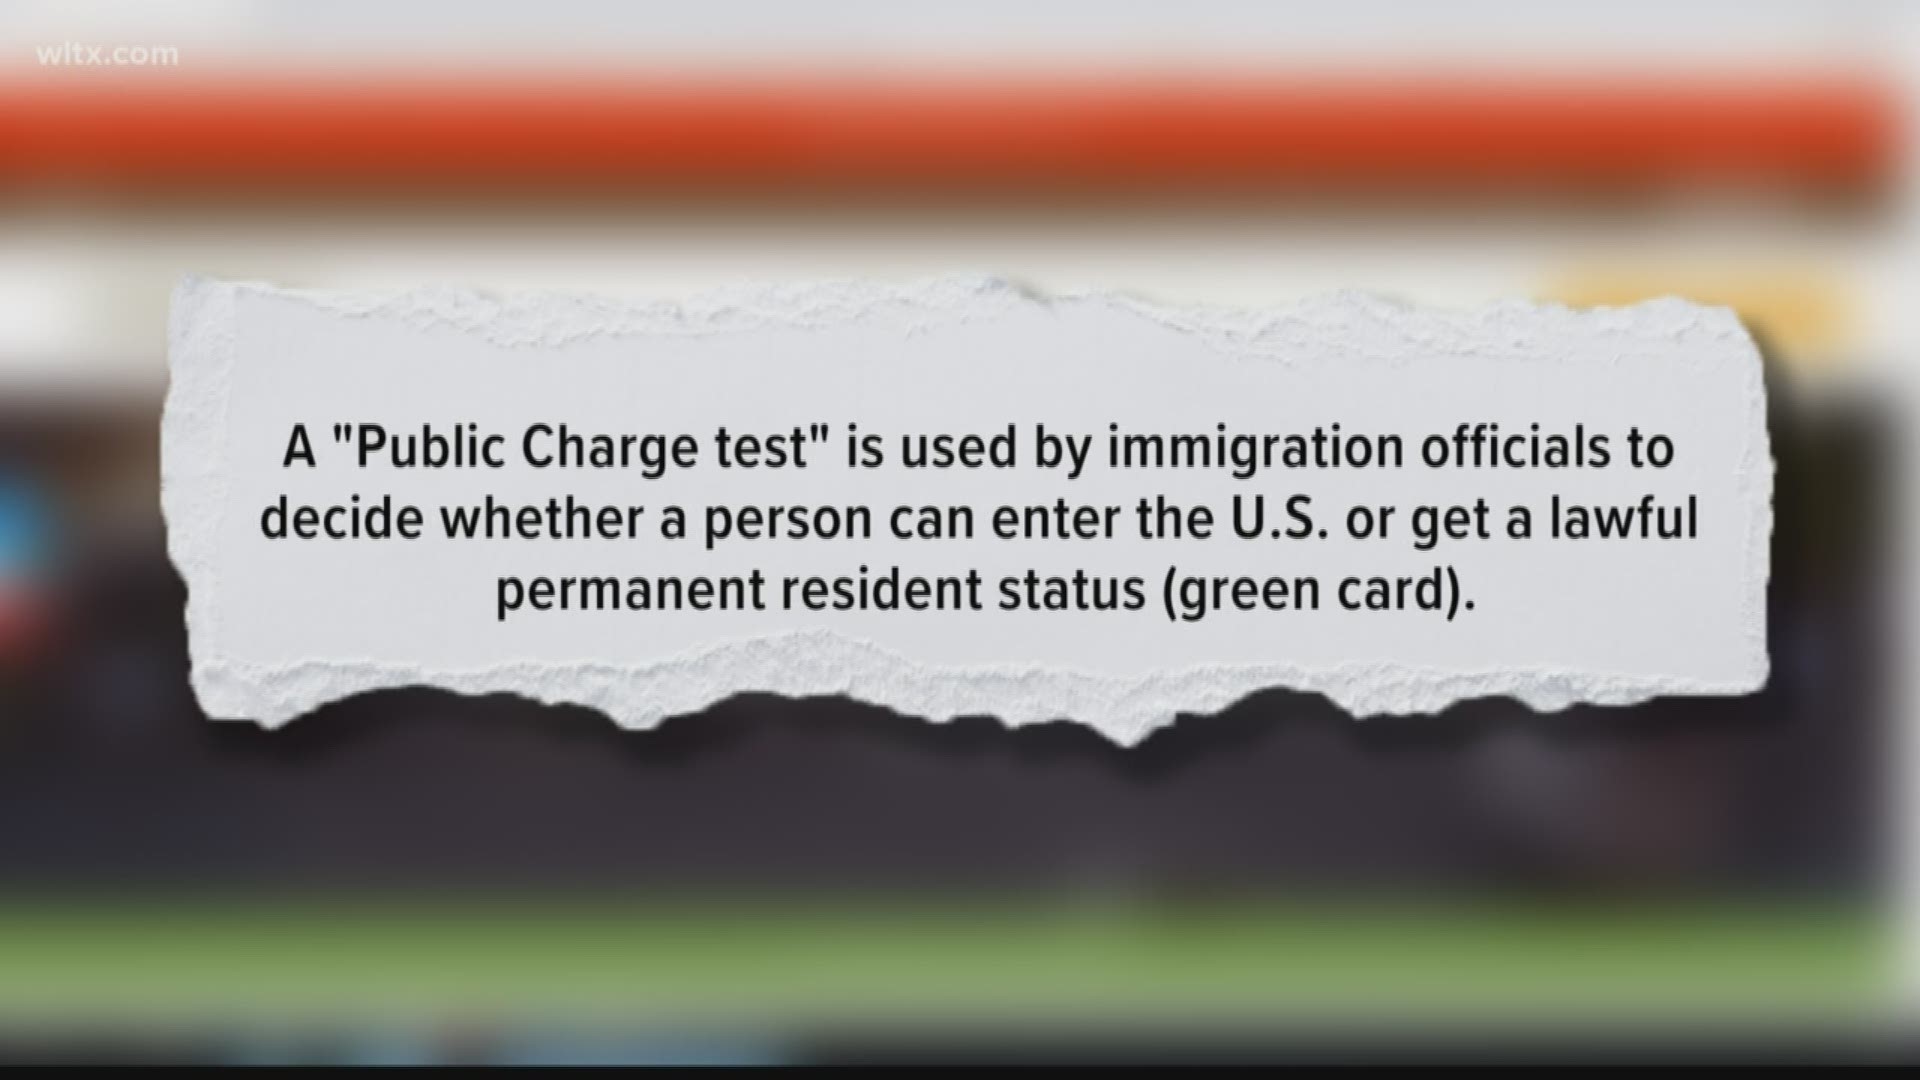 The public charge rule allows immigration officials to decide whether someone can enter the U.S. based on their socioeconomic status.